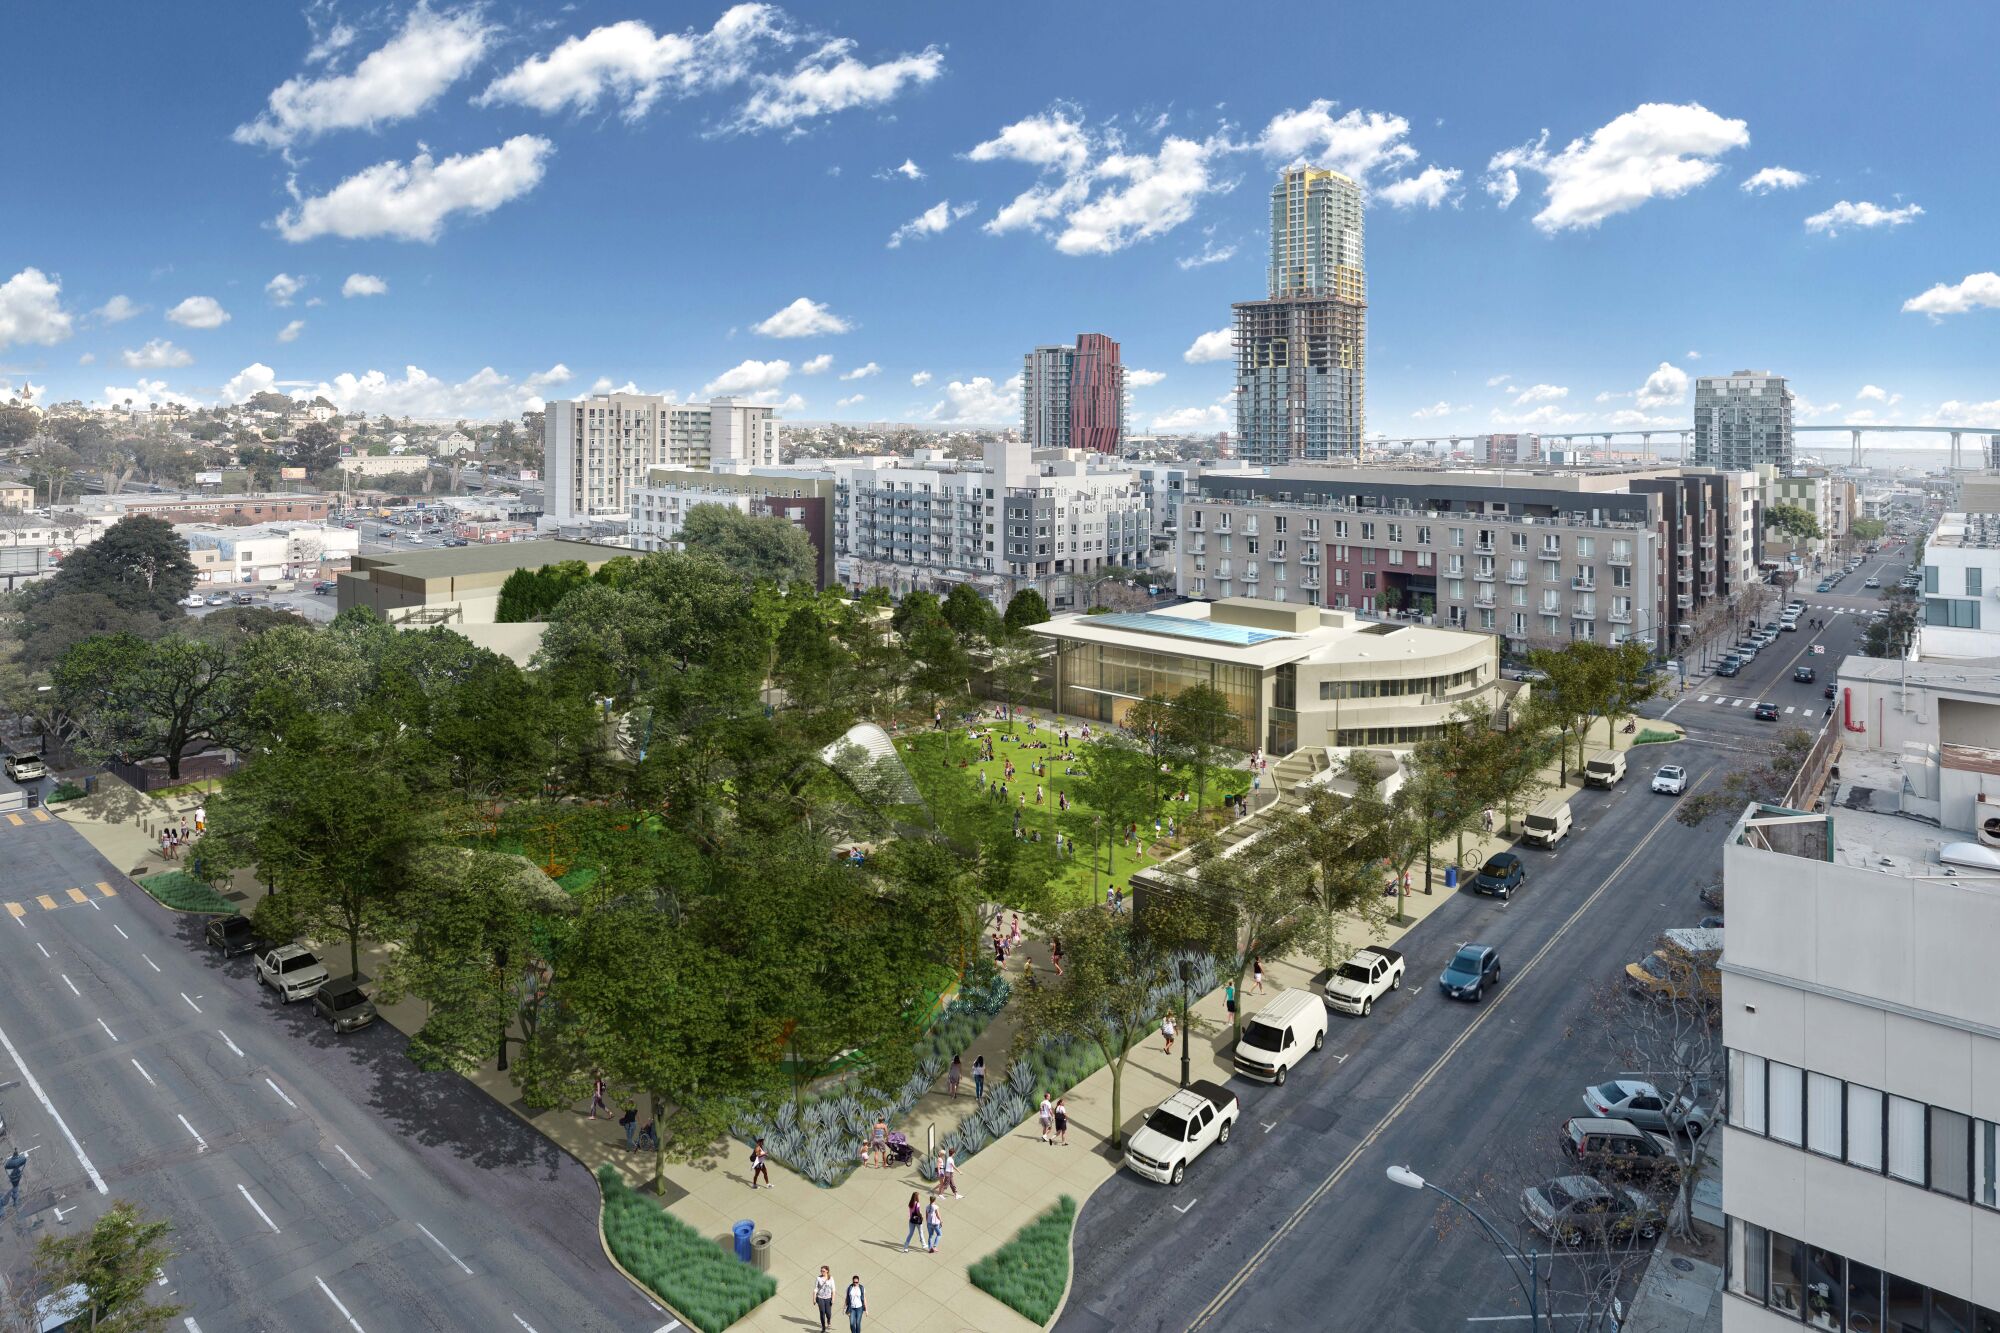 Artist rendering of the four-acre East Village Green, as seen from the corner of 13th and F streets.